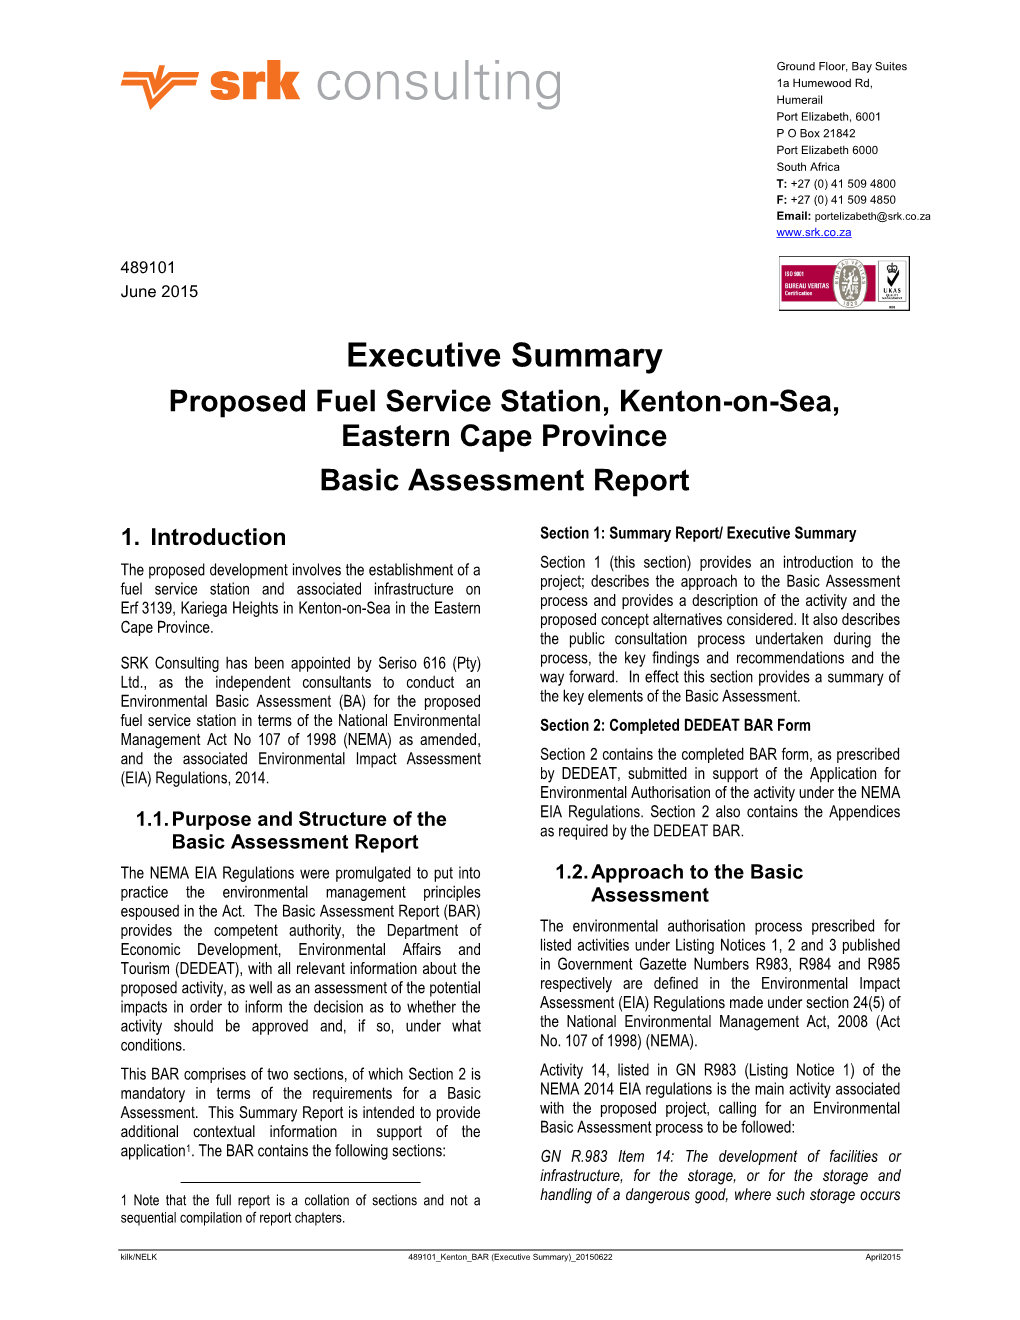 Executive Summary Proposed Fuel Service Station, Kenton-On-Sea, Eastern Cape Province Basic Assessment Report